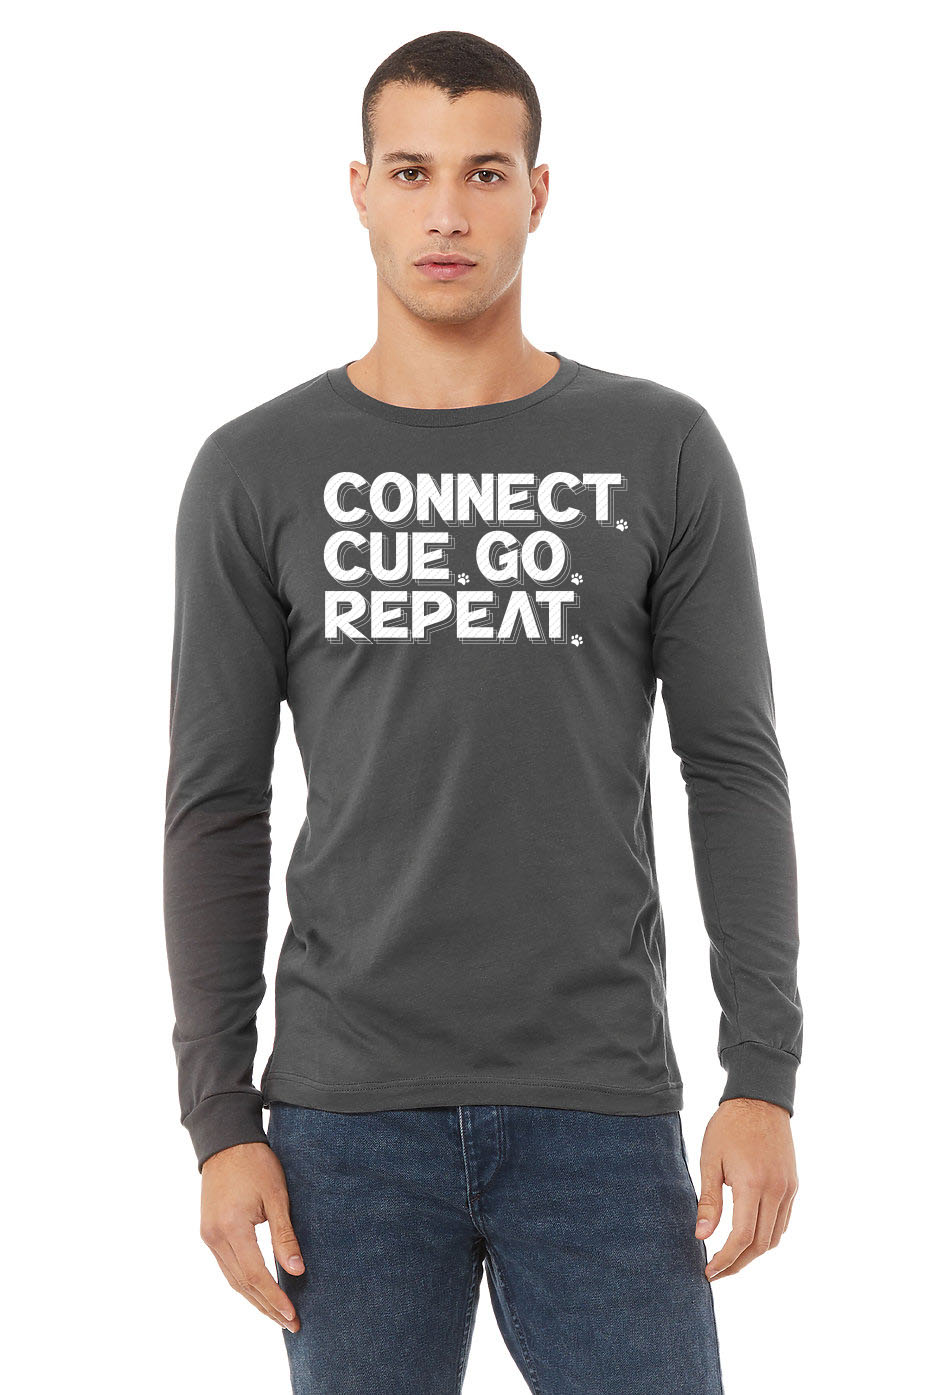 Connect.Cue. Go. Repeat. Long Sleeve(Unisex) - Five Points Training